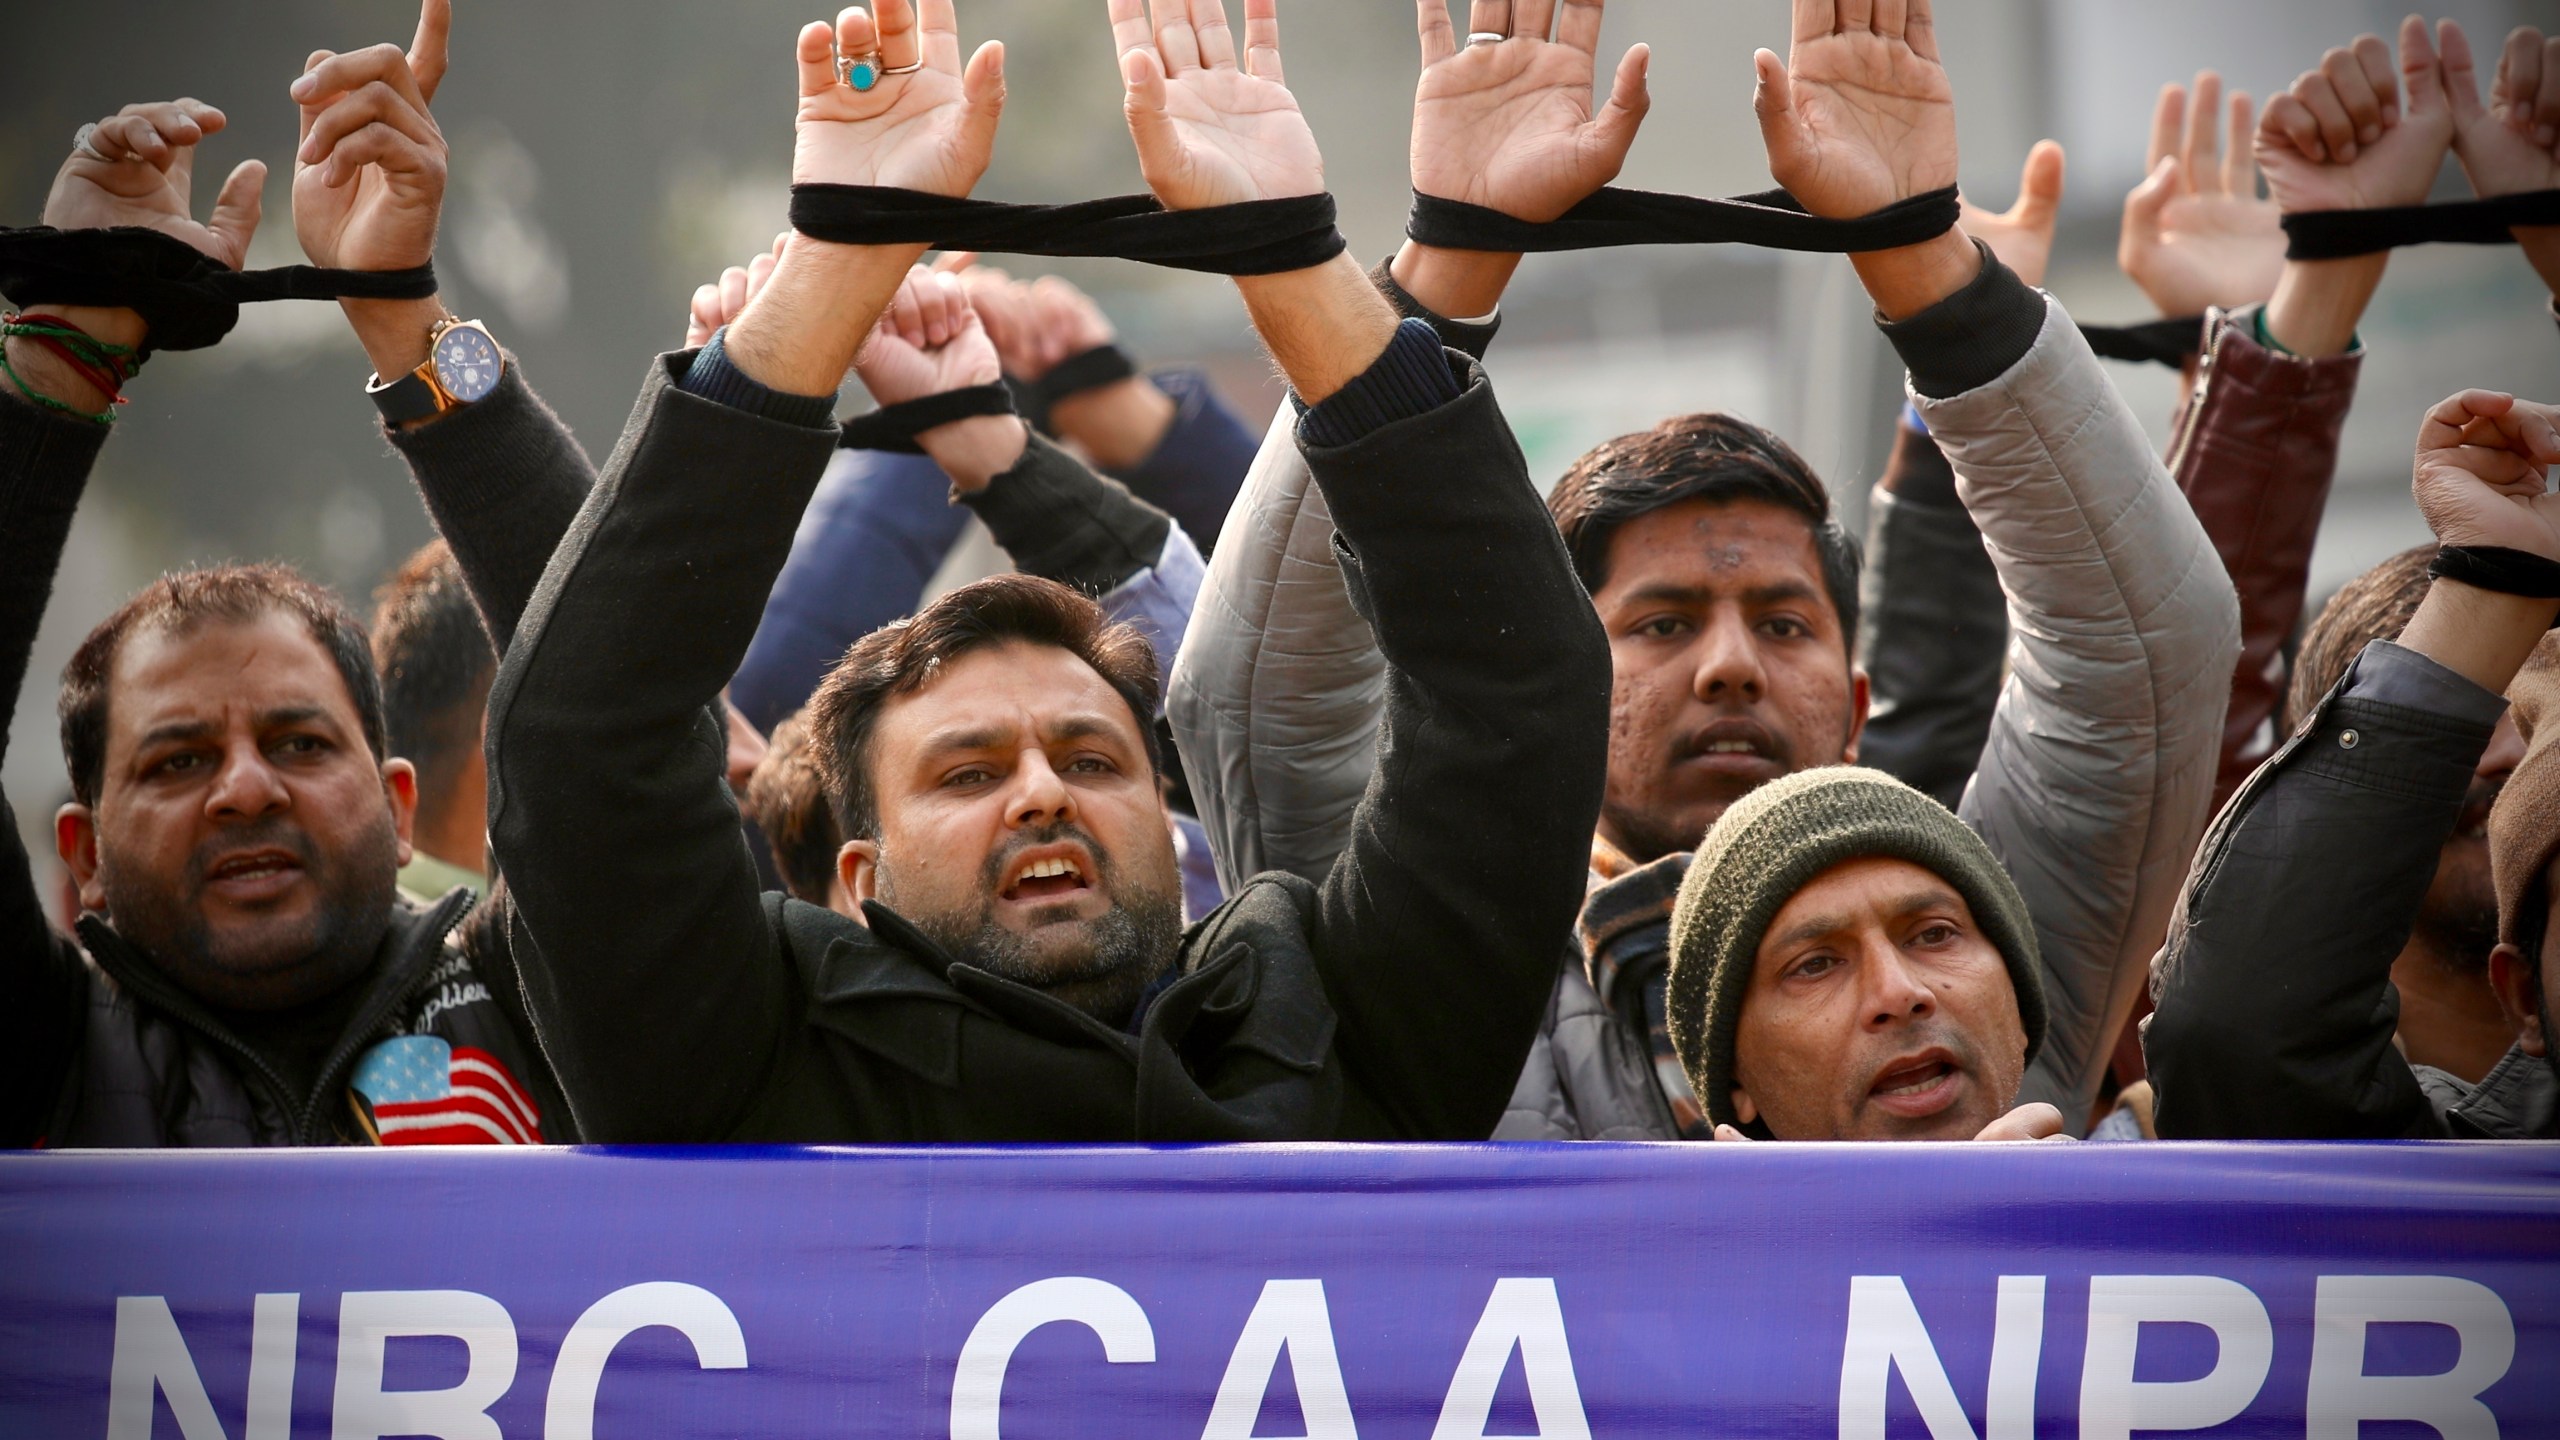 FILE- Indians raise their tied hands and shout slogans during a protest against the Citizenship Amendment Act in New Delhi, India, Dec. 27, 2019. Prime Minister Narendra Modi's government on Monday announced rules to implement a 2019 citizenship law that critics say is discriminatory against Muslims, weeks before the Hindu nationalist leader will seek a third term in office. (AP Photo/Manish Swarup, File)